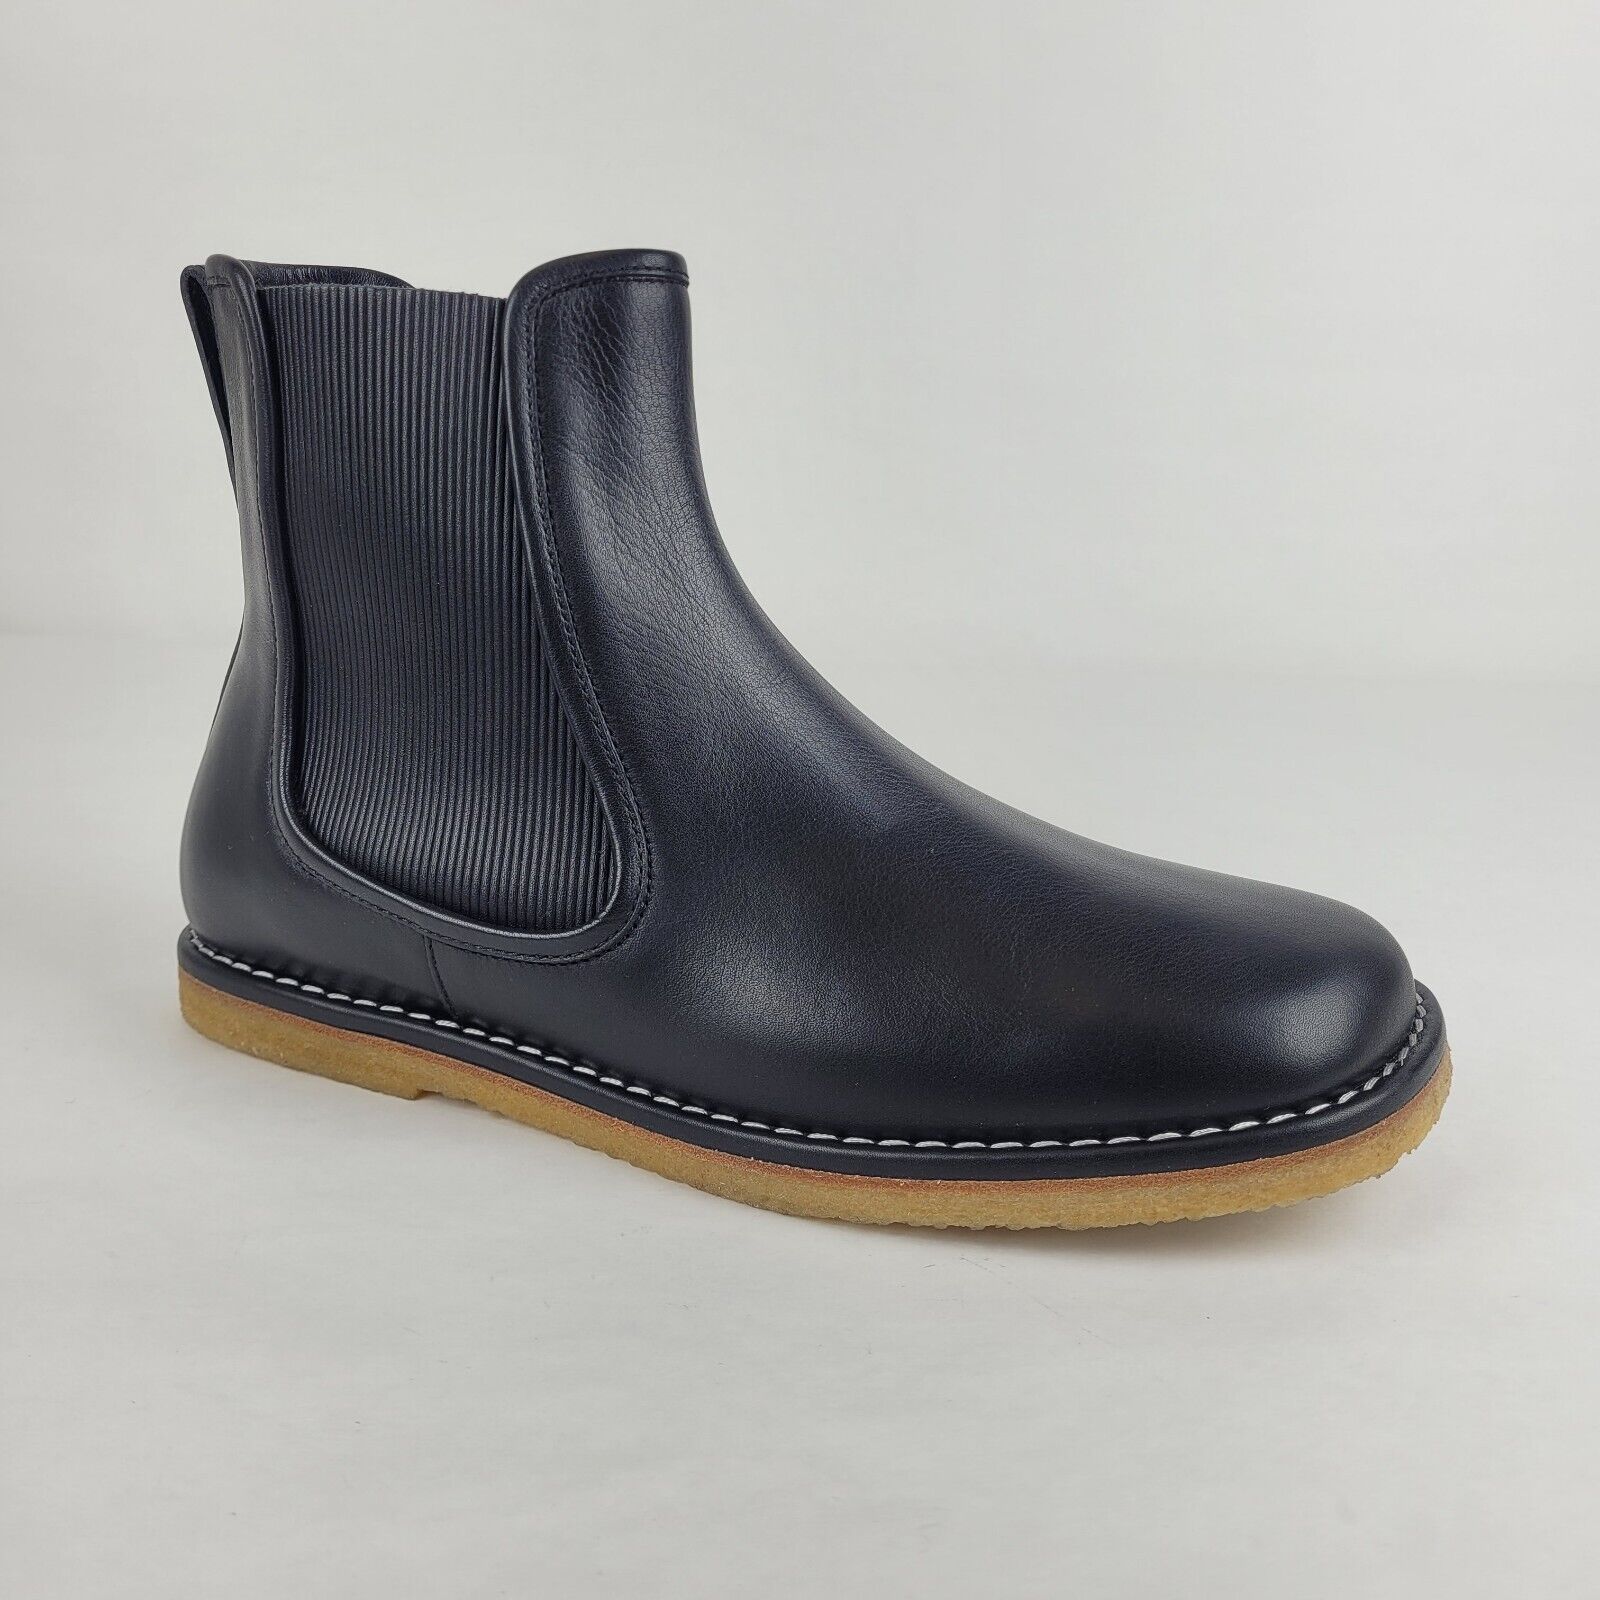 Pre-owned Loewe $890  Black Leather Chelsea Ankle Boot With Elastic Sides M816s05x01 1100